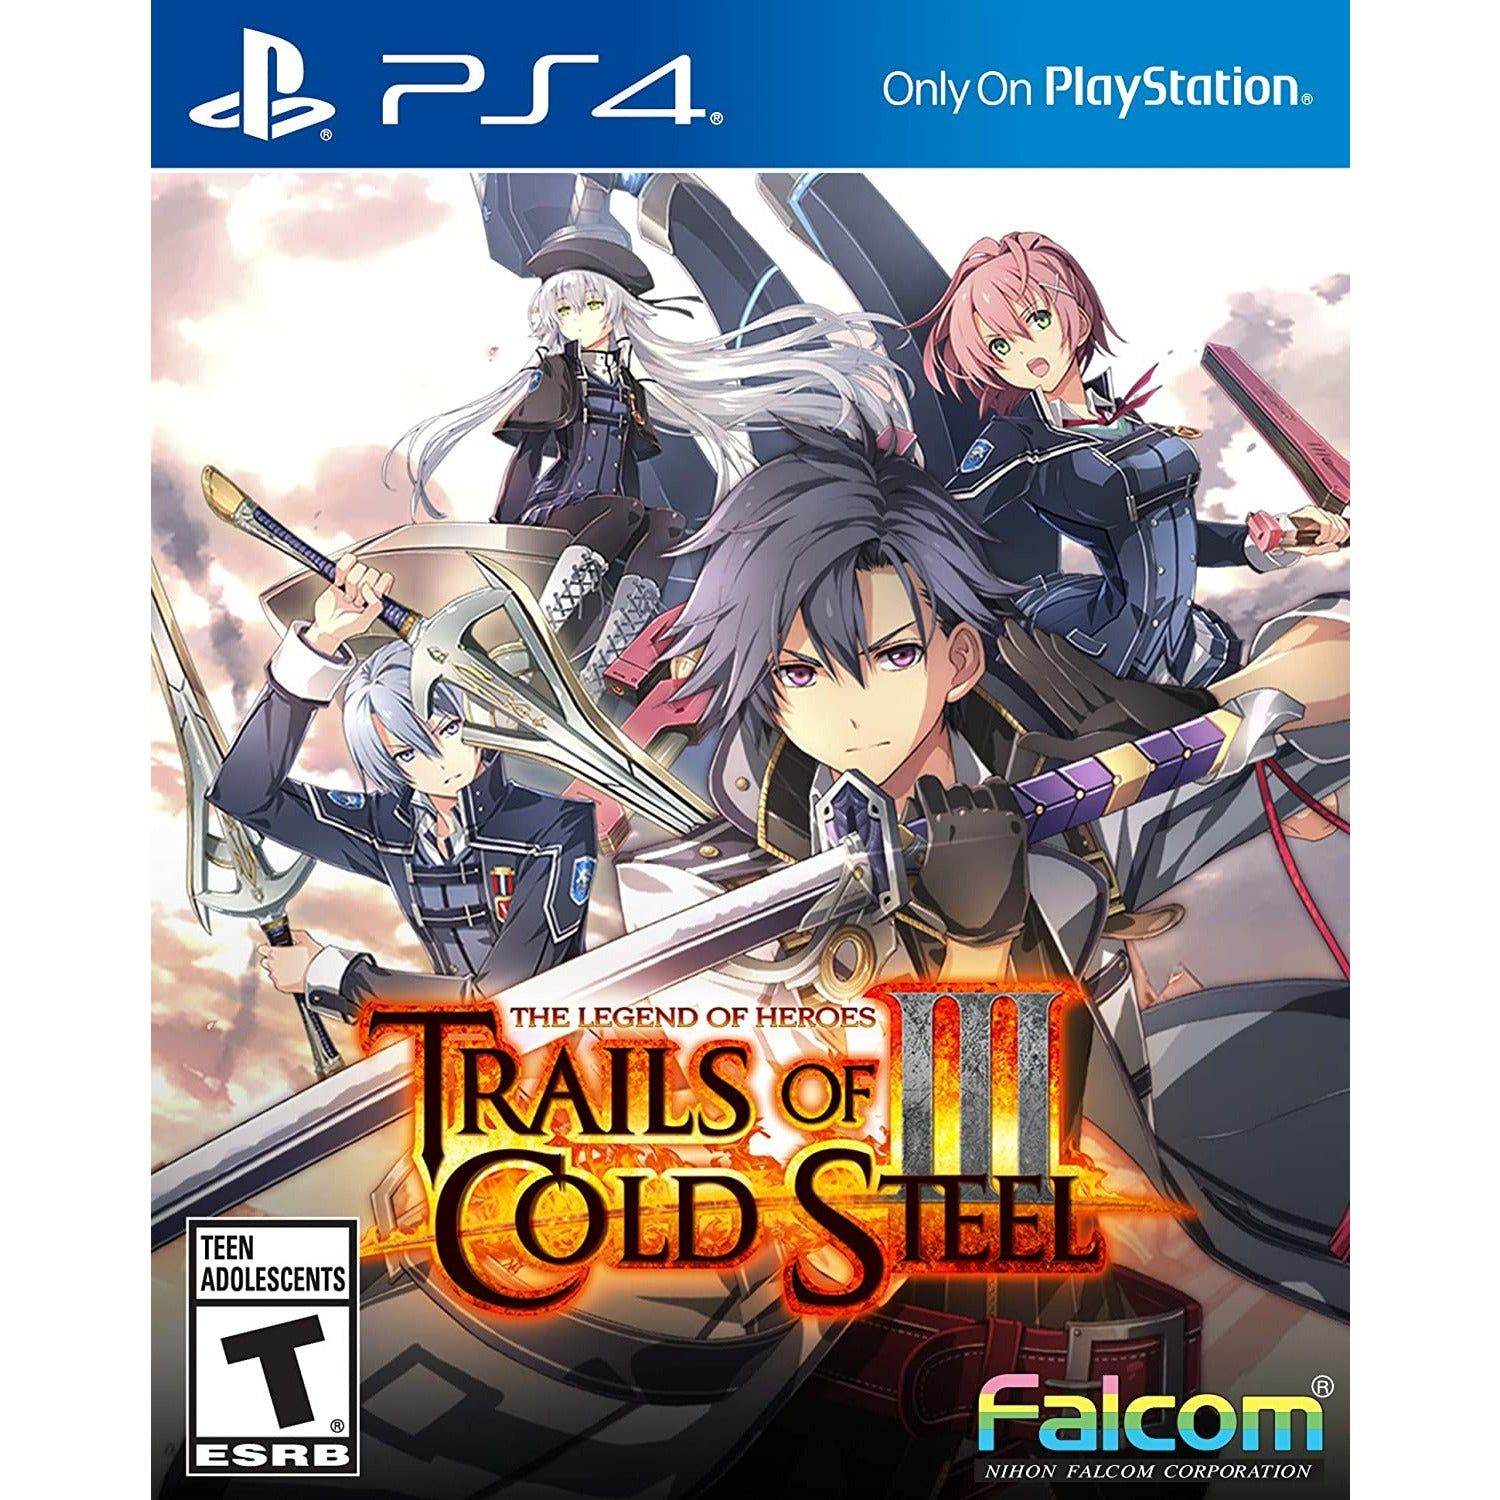 PS4 - The Legend Of Heroes Trails Of Cold Steel III